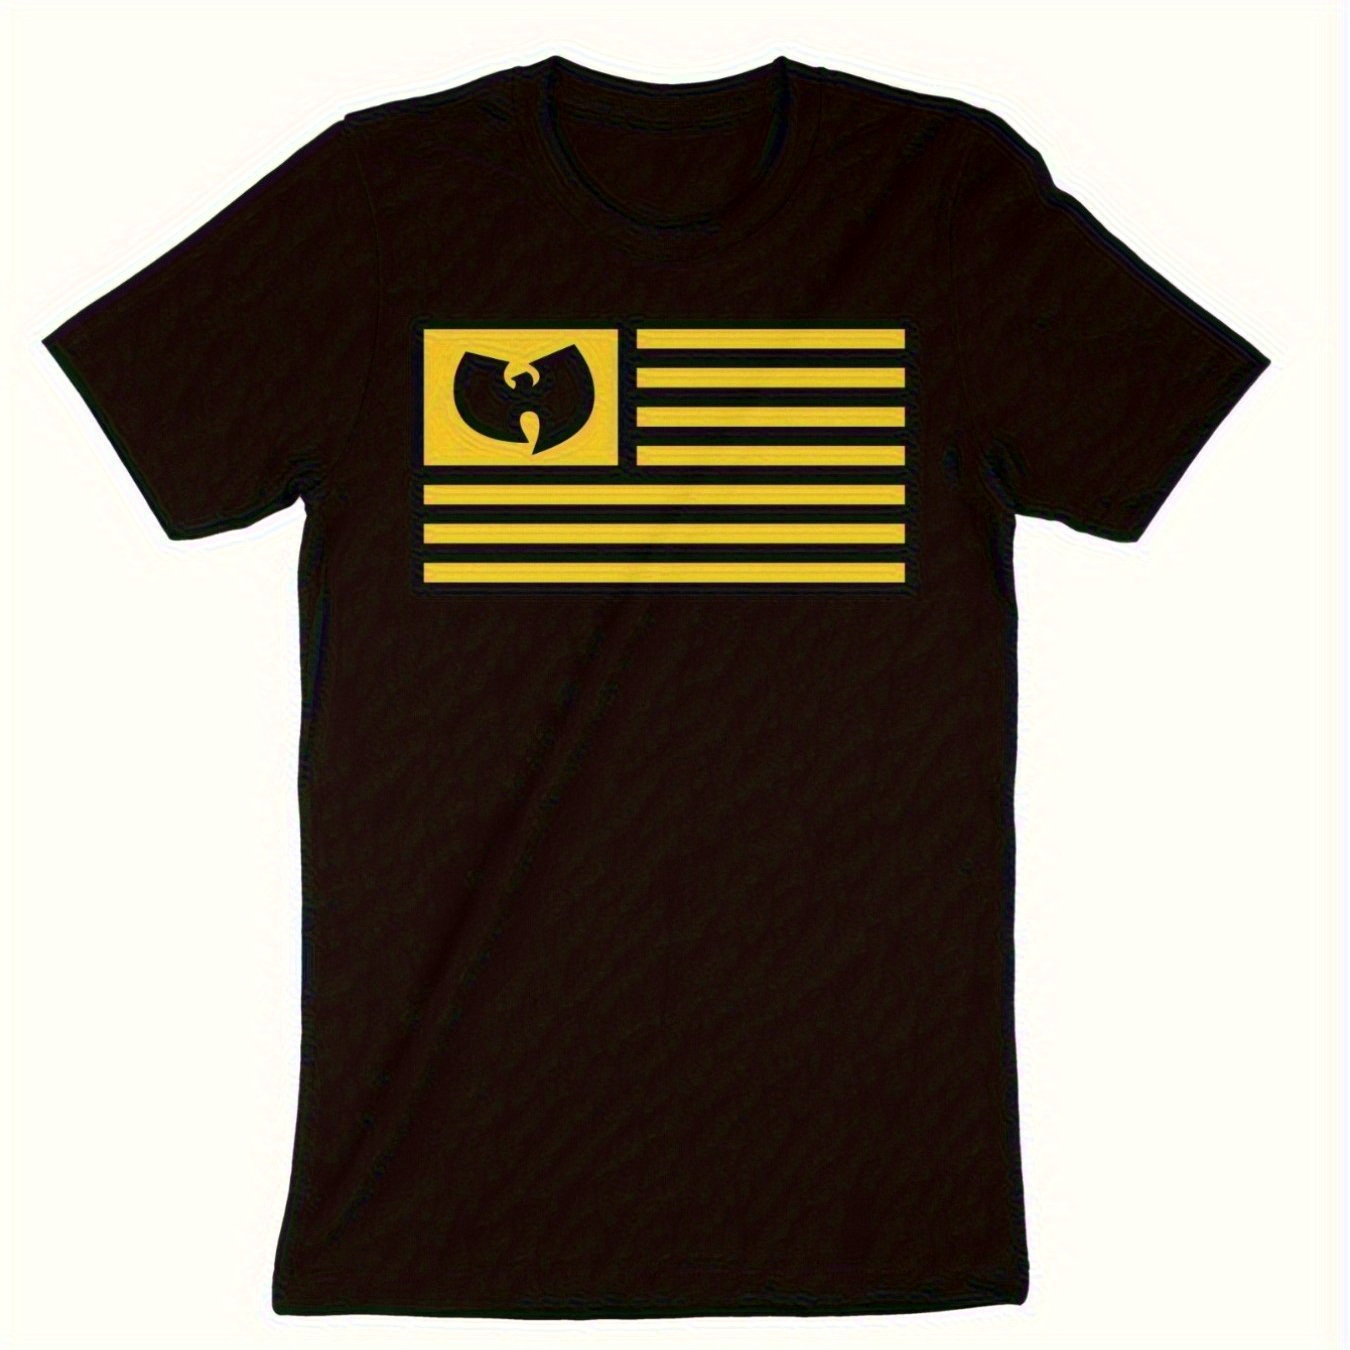 

Men's Wu Flag Street Design Graphic T-shirt Black Yellow Men's S-3xl - Perfect For Hot Summer Days, Daily Activities And Casual Outings